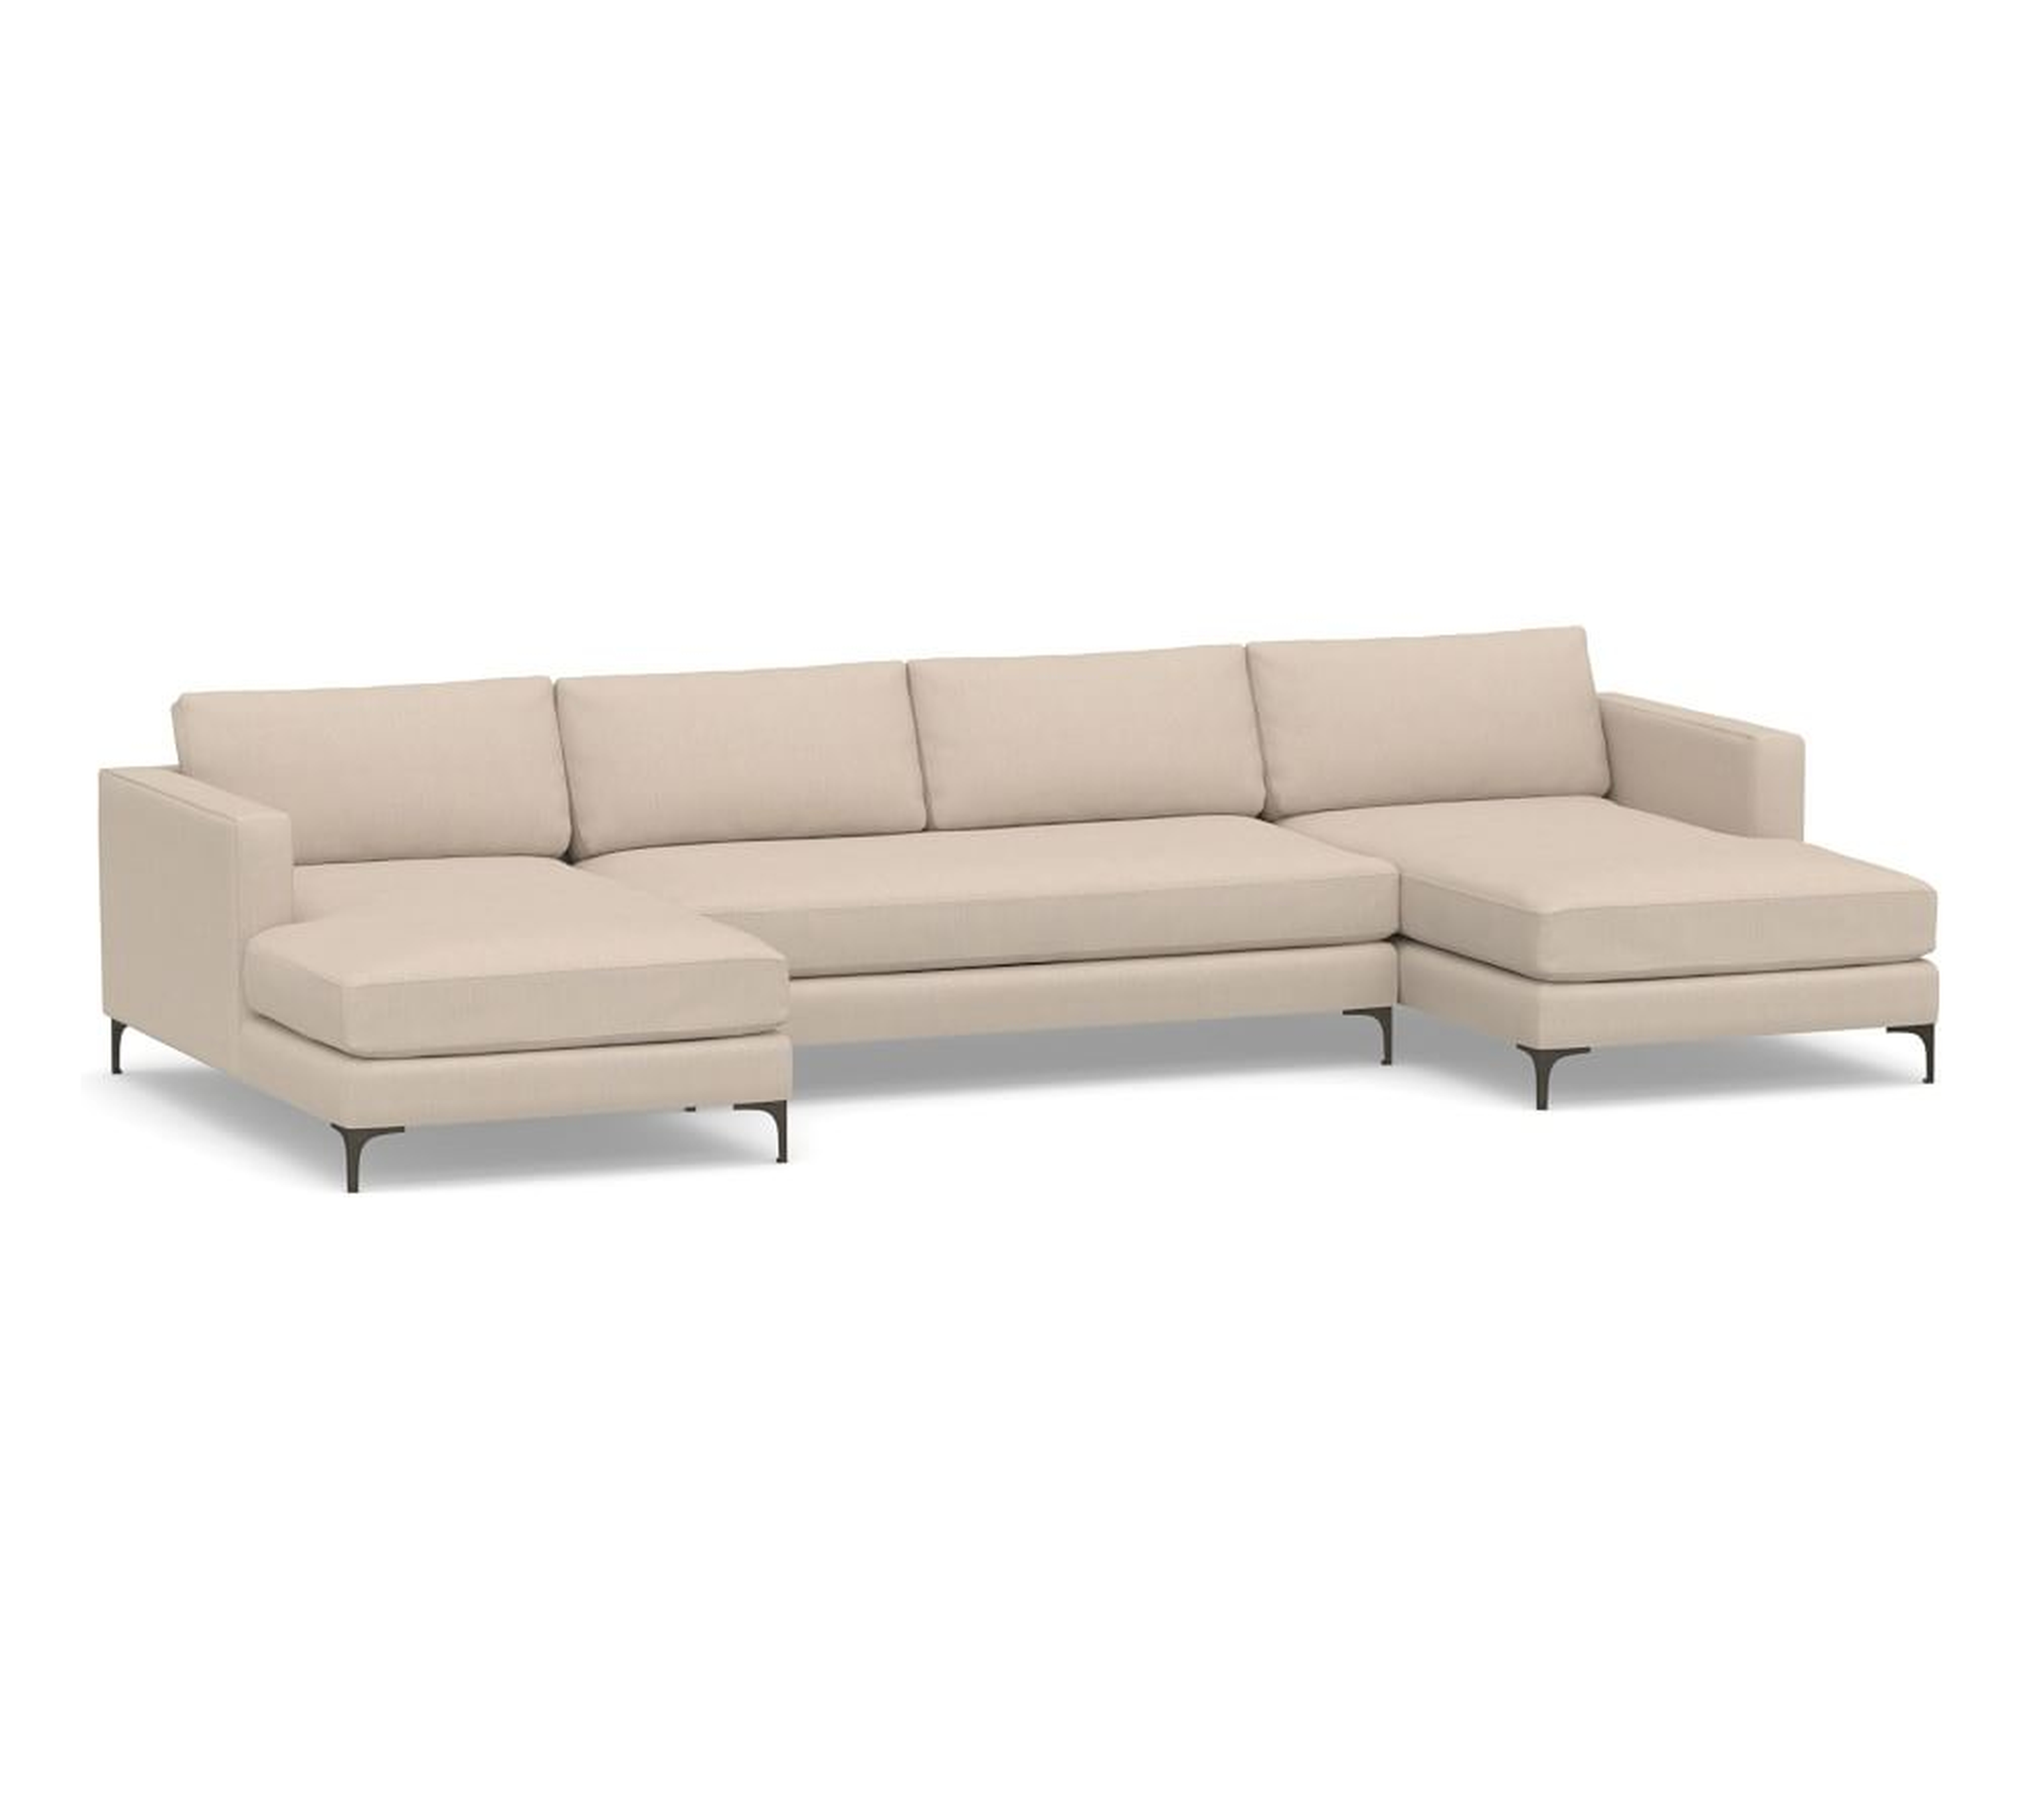 Jake Upholstered U-Chaise Loveseat Sectional 2X1, Bench Cushion, with Bronze Legs, Polyester Wrapped Cushions, Sunbrella(R) Performance Sahara Weave Oatmeal - Pottery Barn